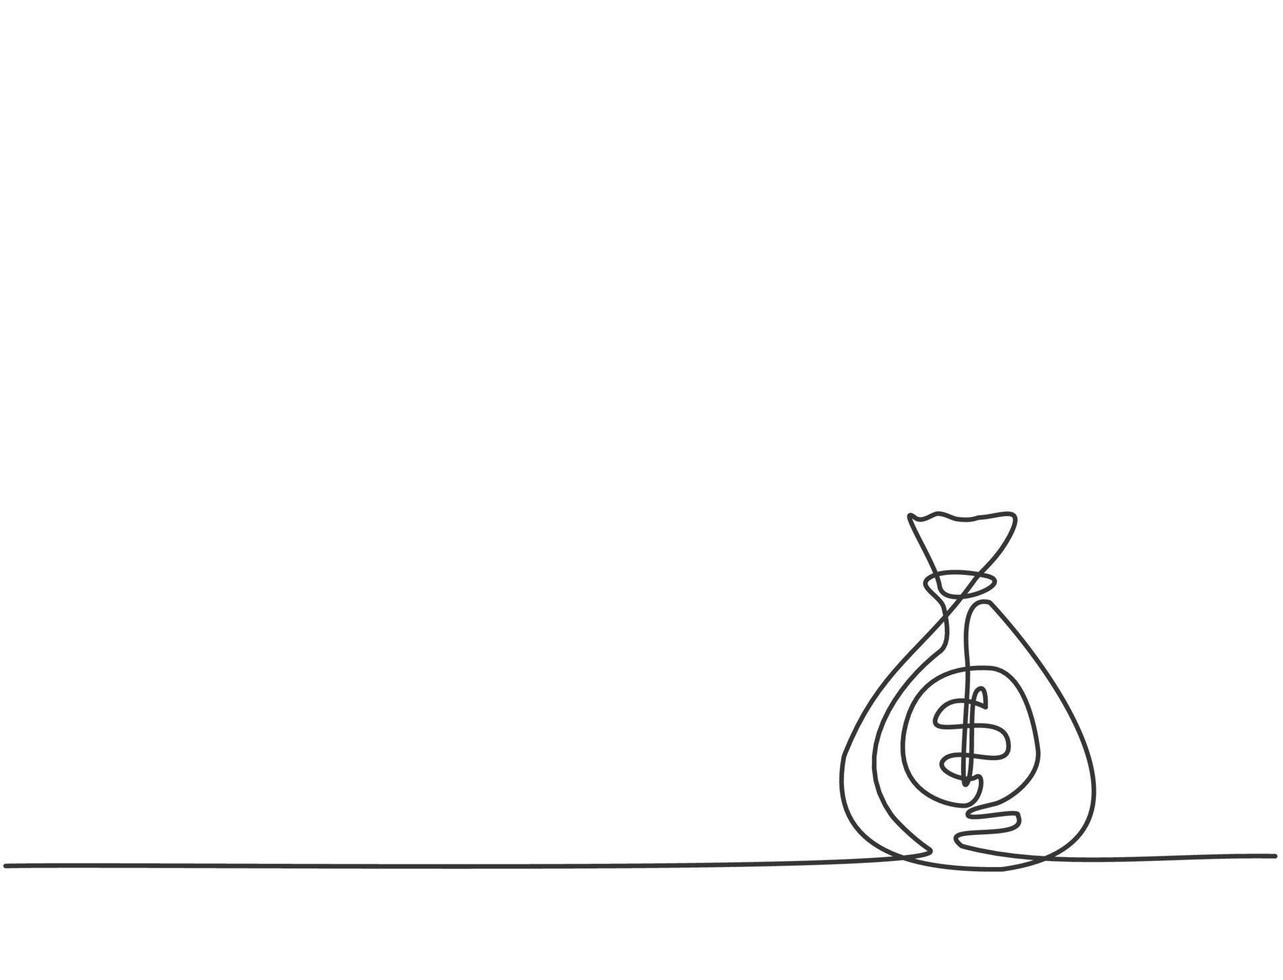 Single continuous line drawing of bank money bag on the floor